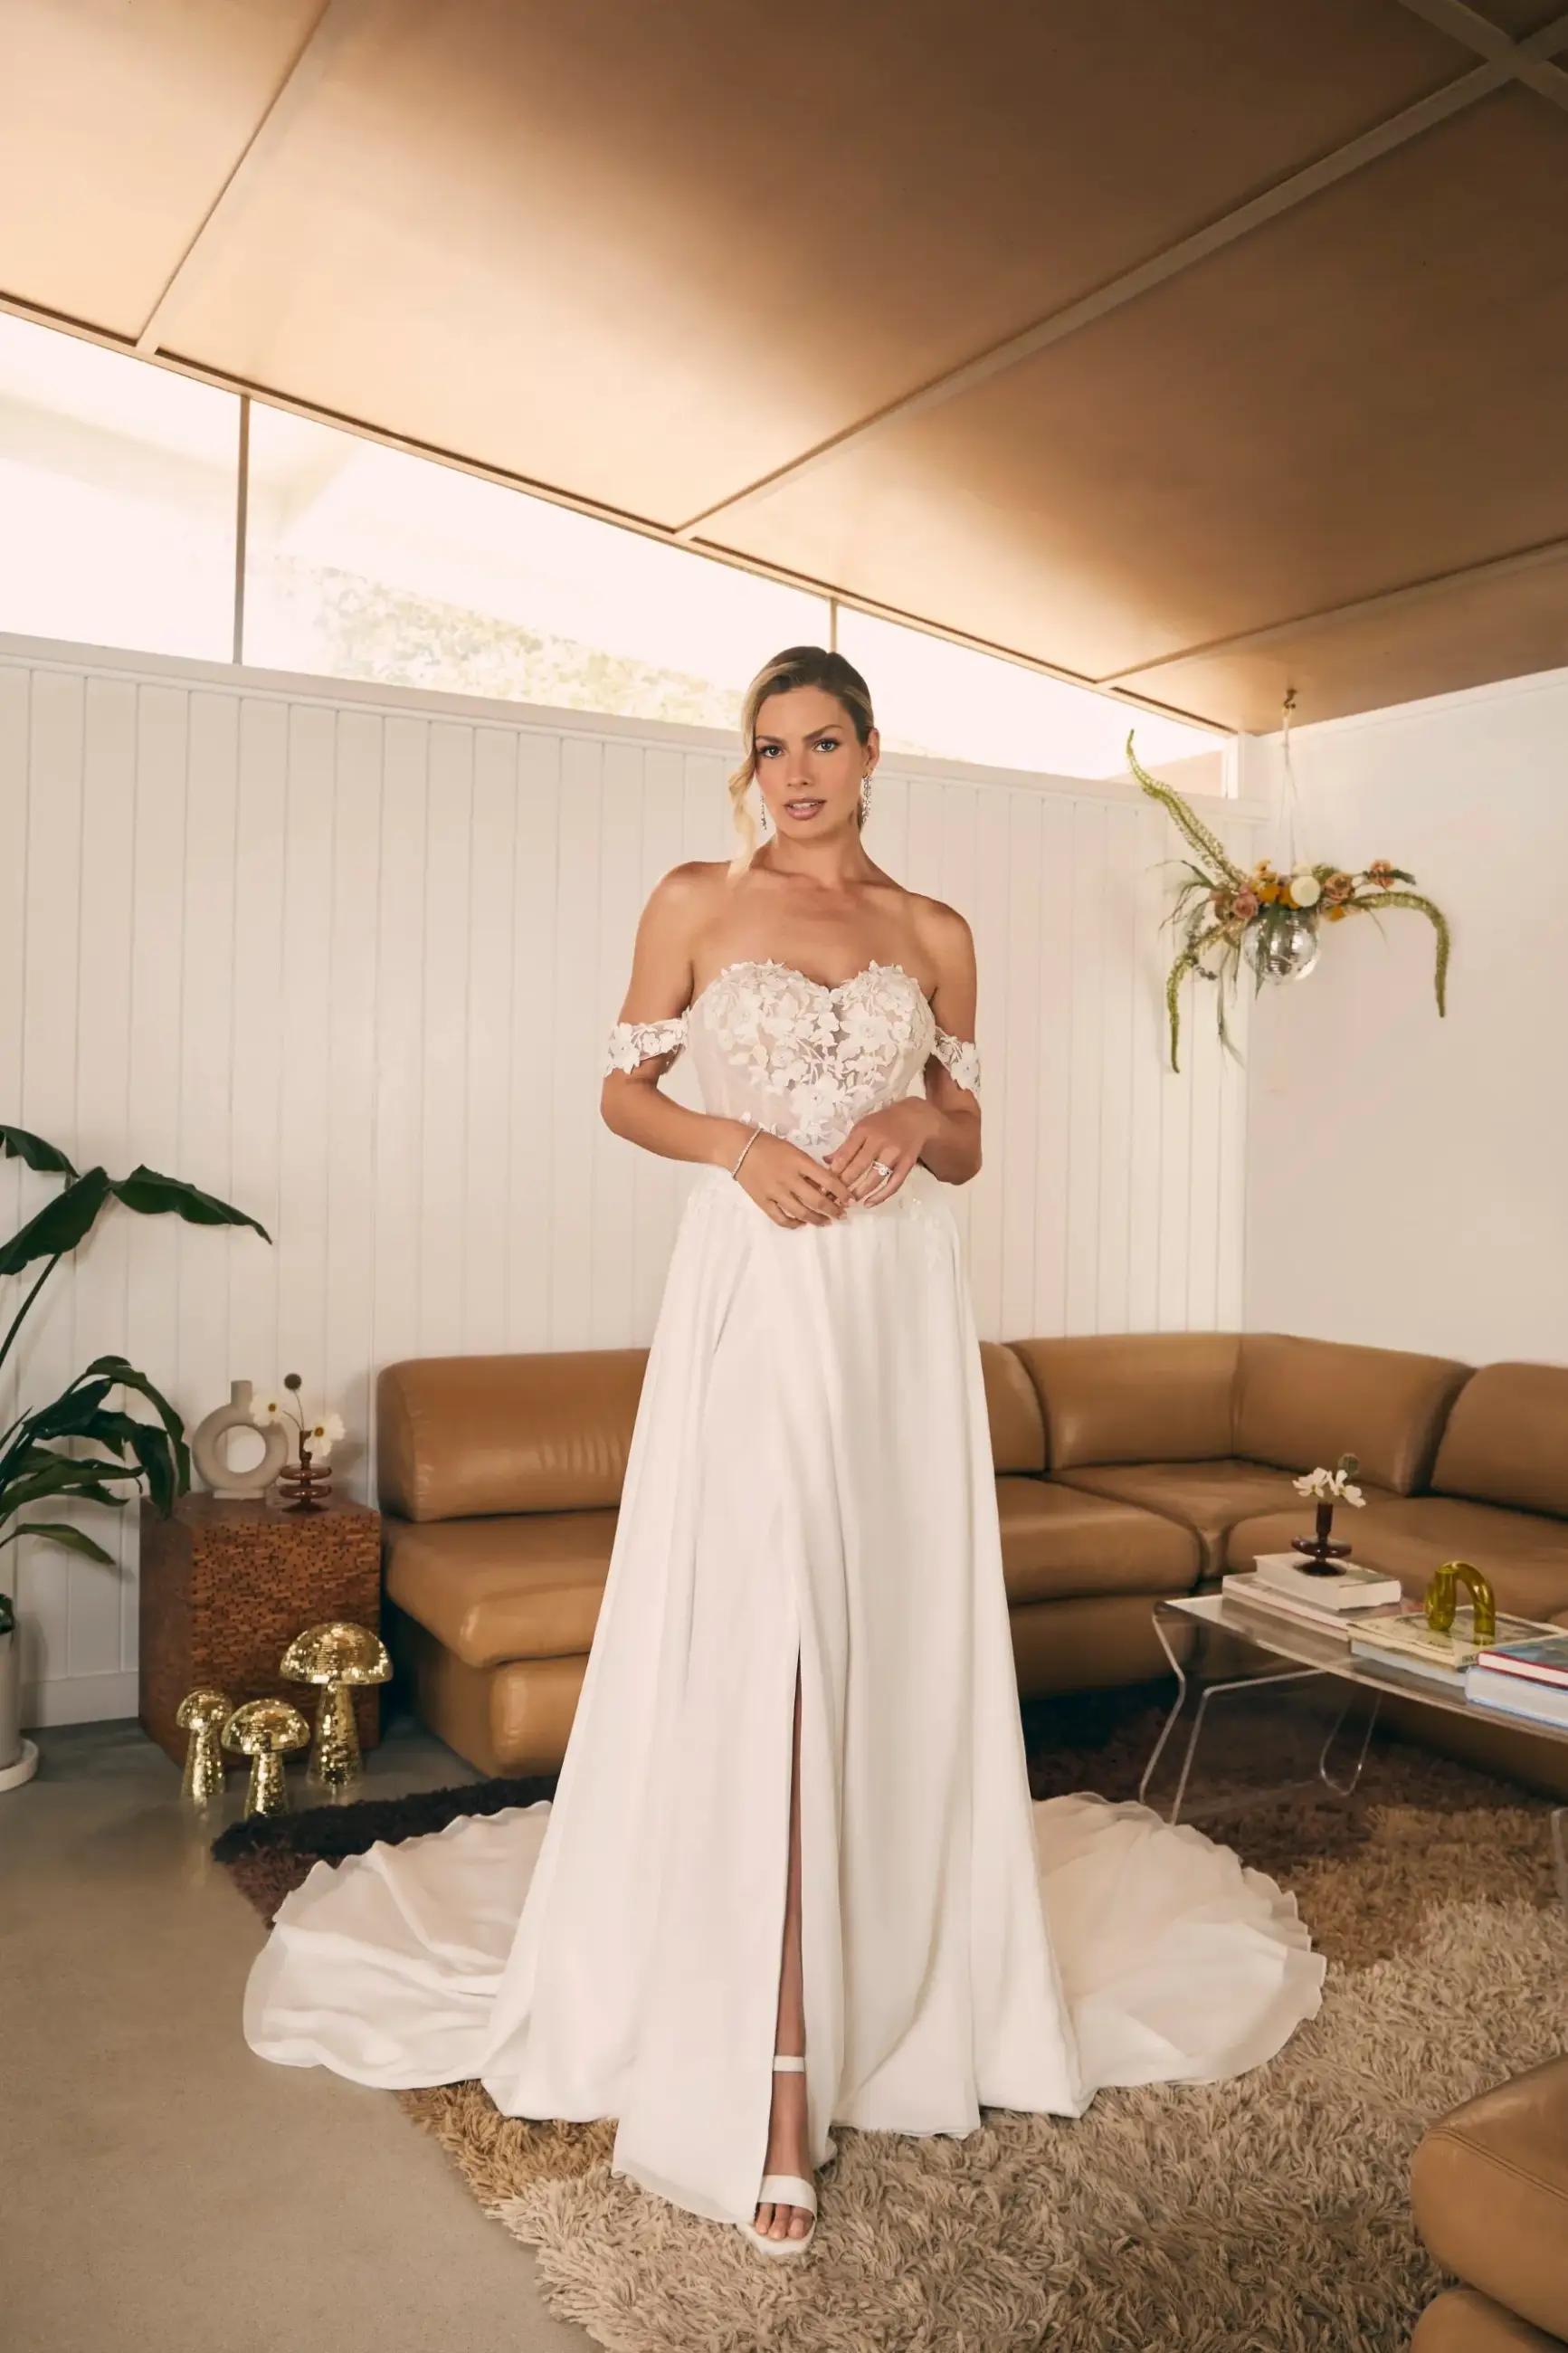 From Classic to Contemporary: Trending Wedding Gowns That Suit Every Style Image